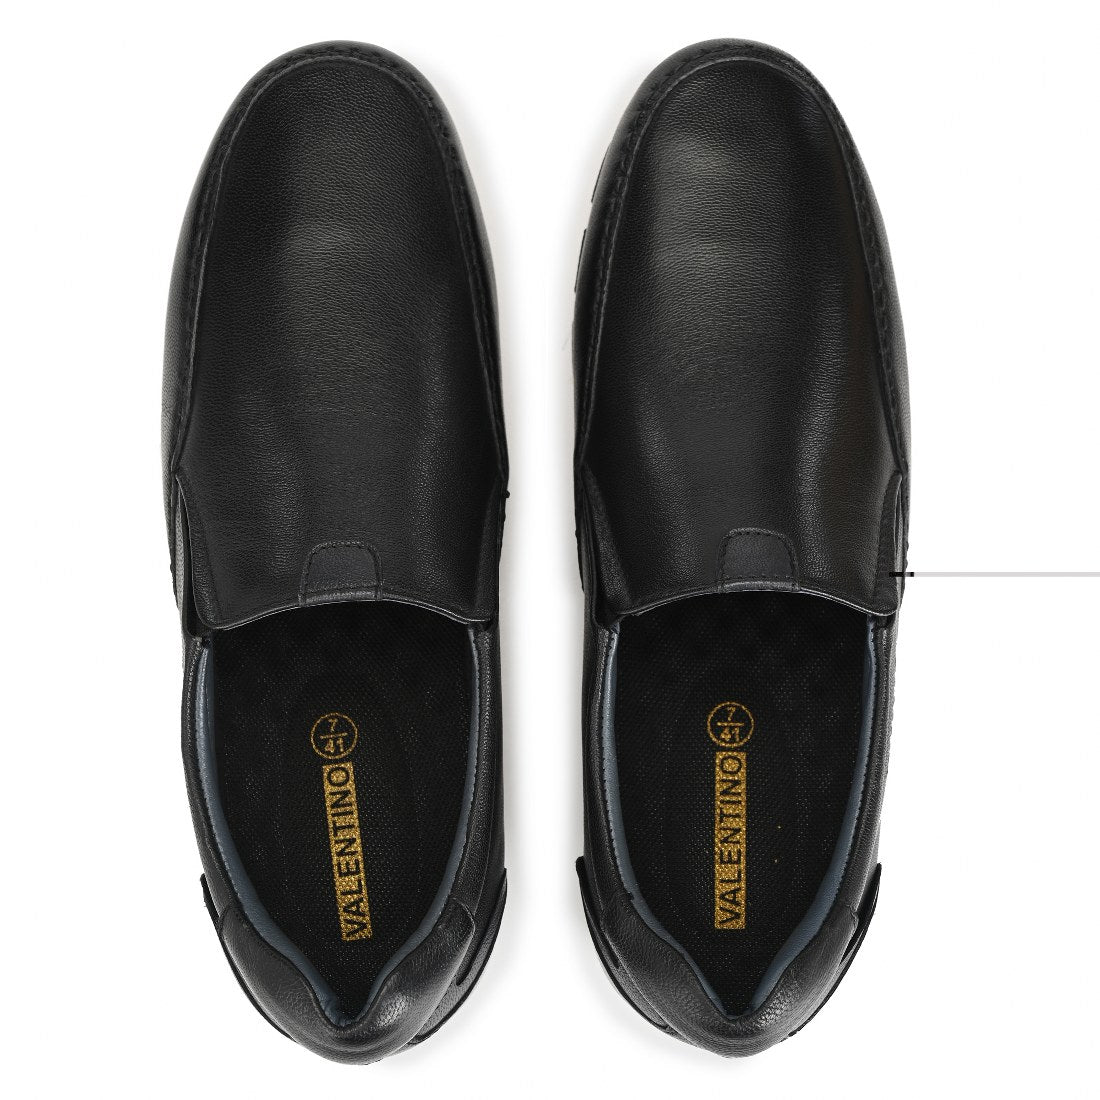 CREATIVE-06 MEN LEATHER BLACK CASUAL SLIP ON MOCCASSINS